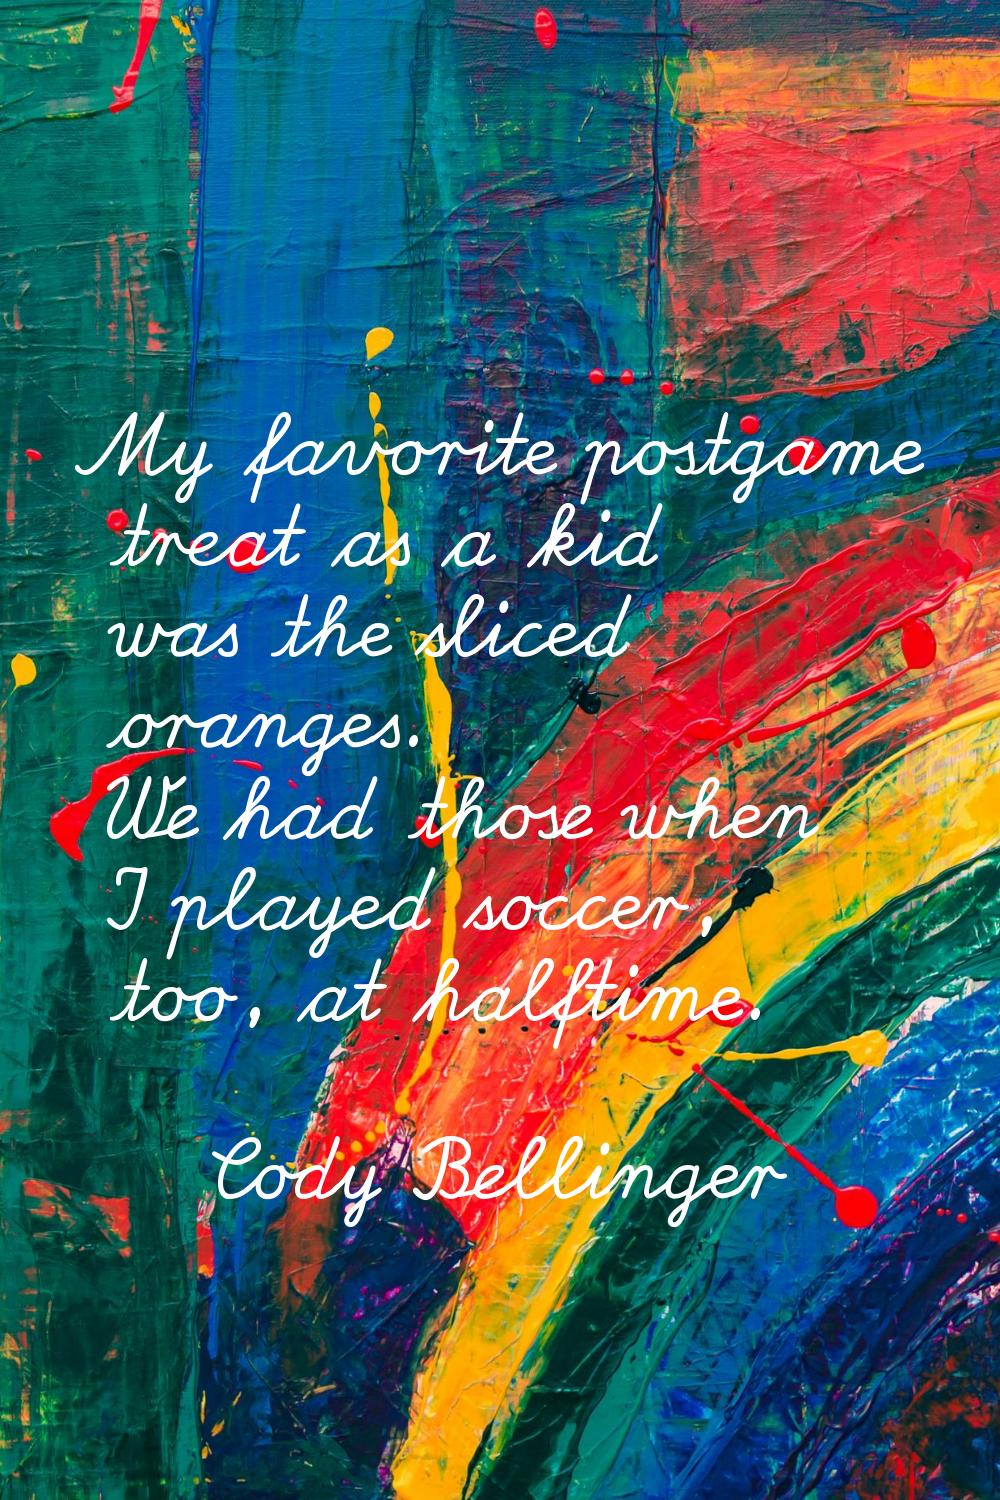 My favorite postgame treat as a kid was the sliced oranges. We had those when I played soccer, too,